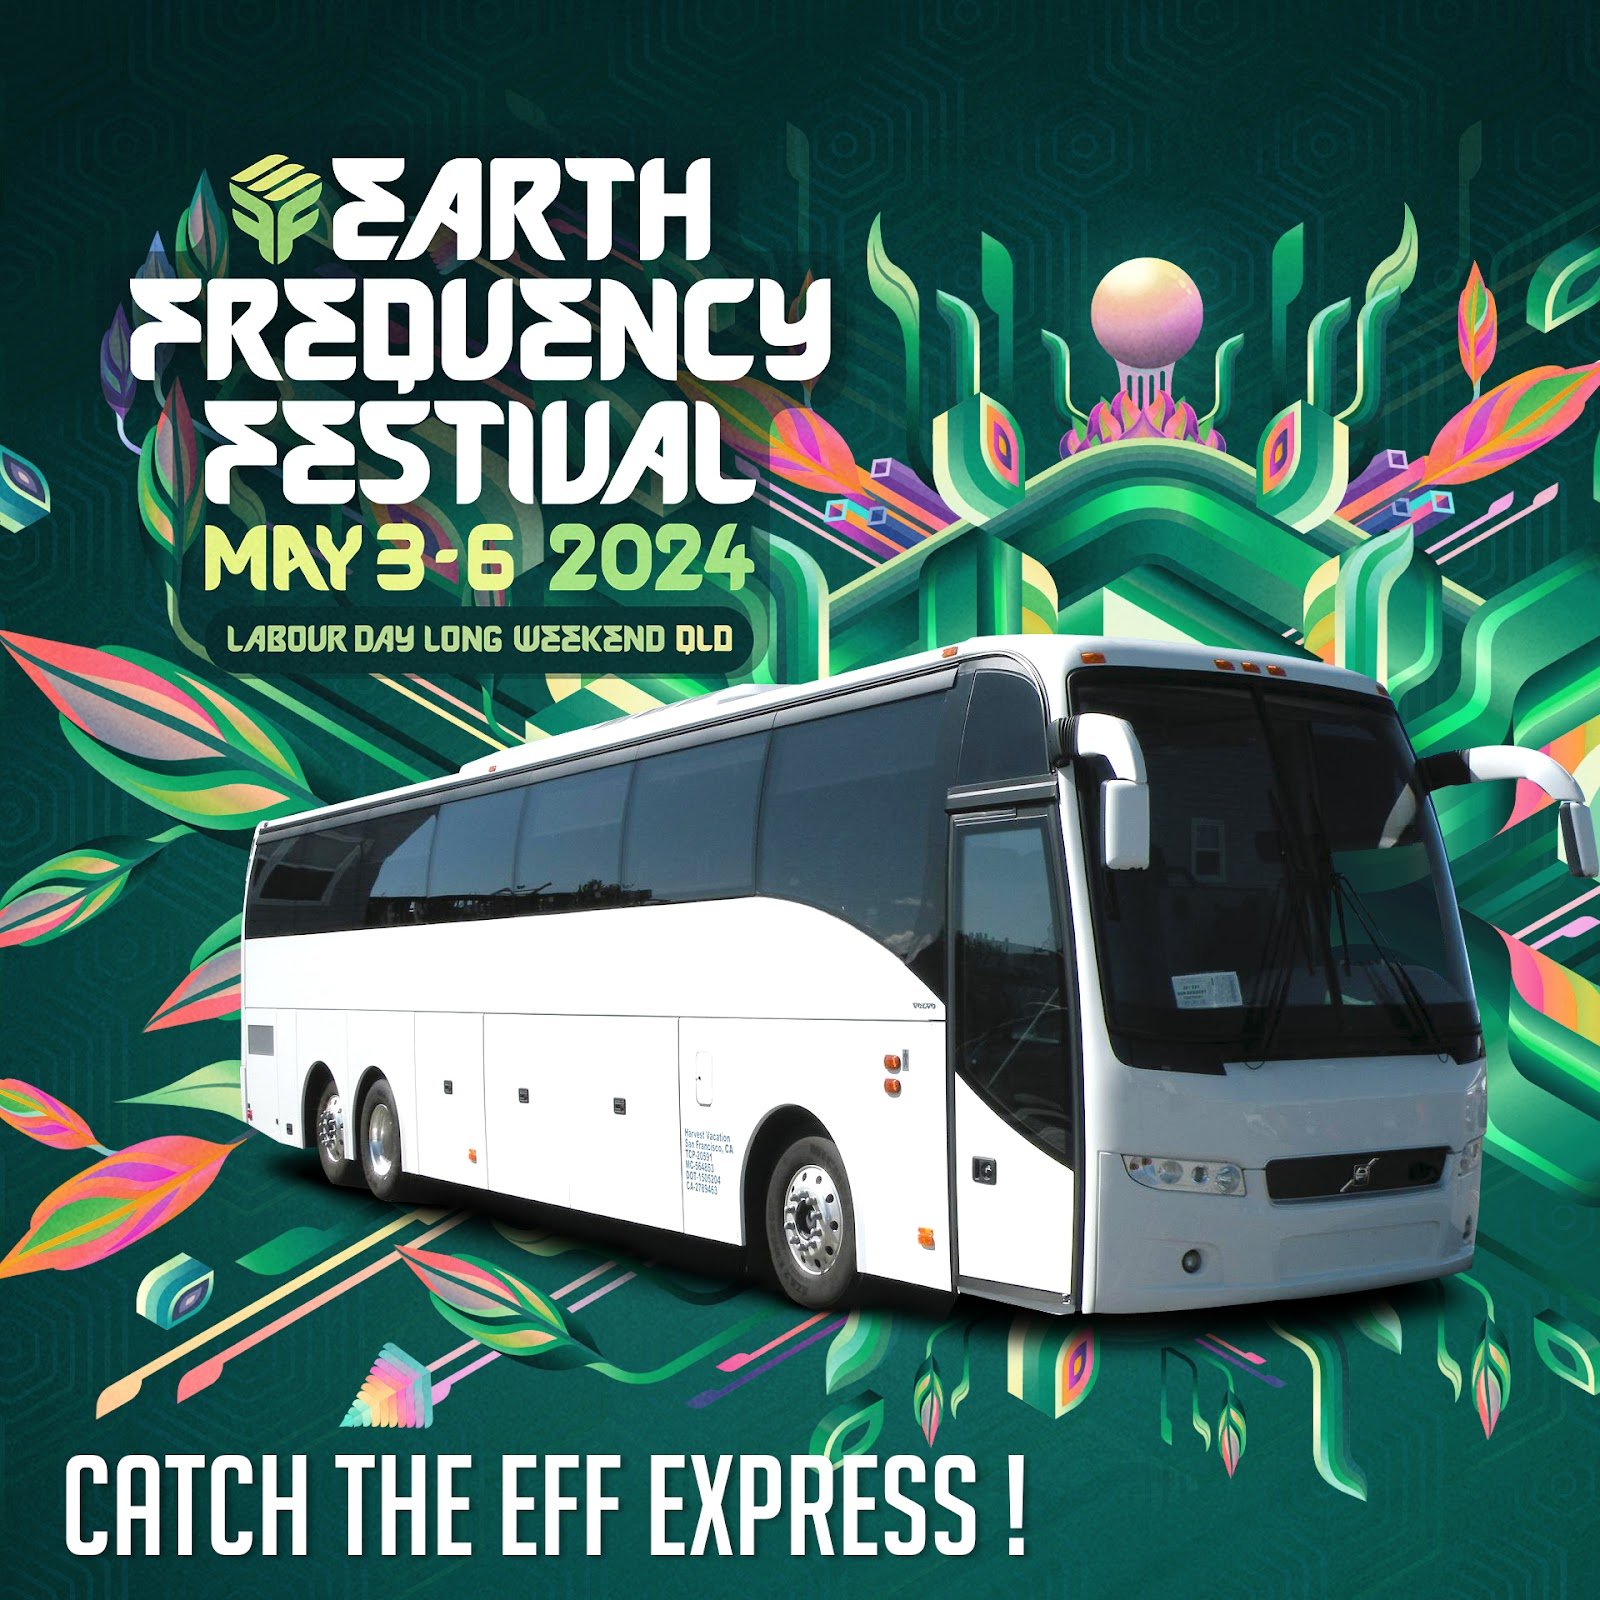 For anyone catching the EFF Express today, an email with all the information about the pickup locations and times has been sent out.  You can also access this information at https://www.earthfrequency.com.au/eff-express-shuttle

If you have any quest